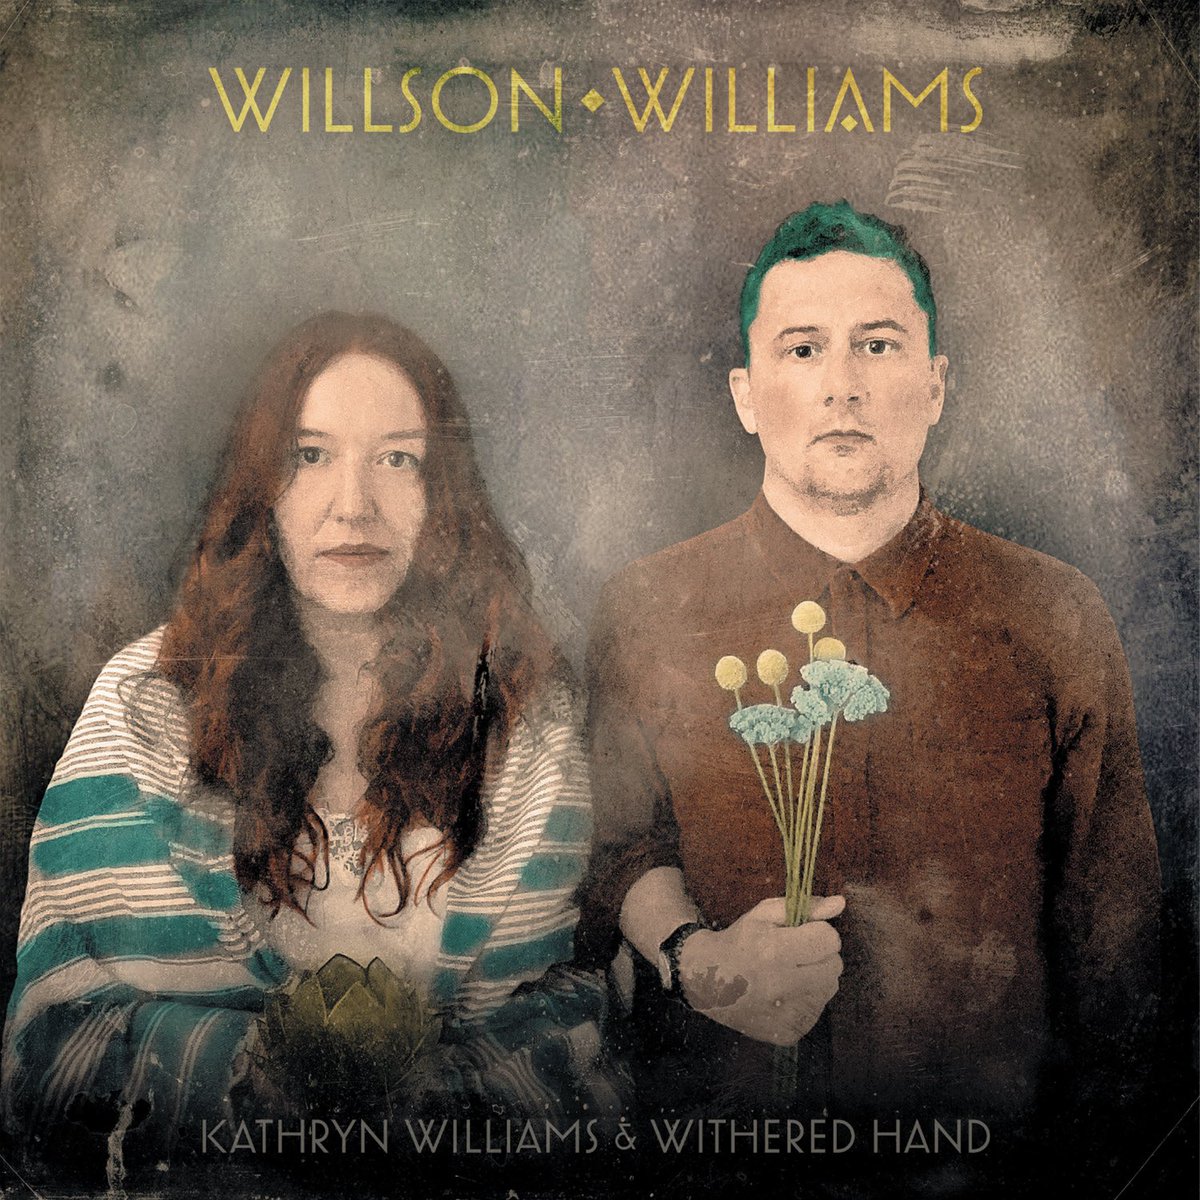 Happy release day ⁦@witheredhand⁩ !!! We made a beautiful thing my friend x listeners please let us know your favourite songs.